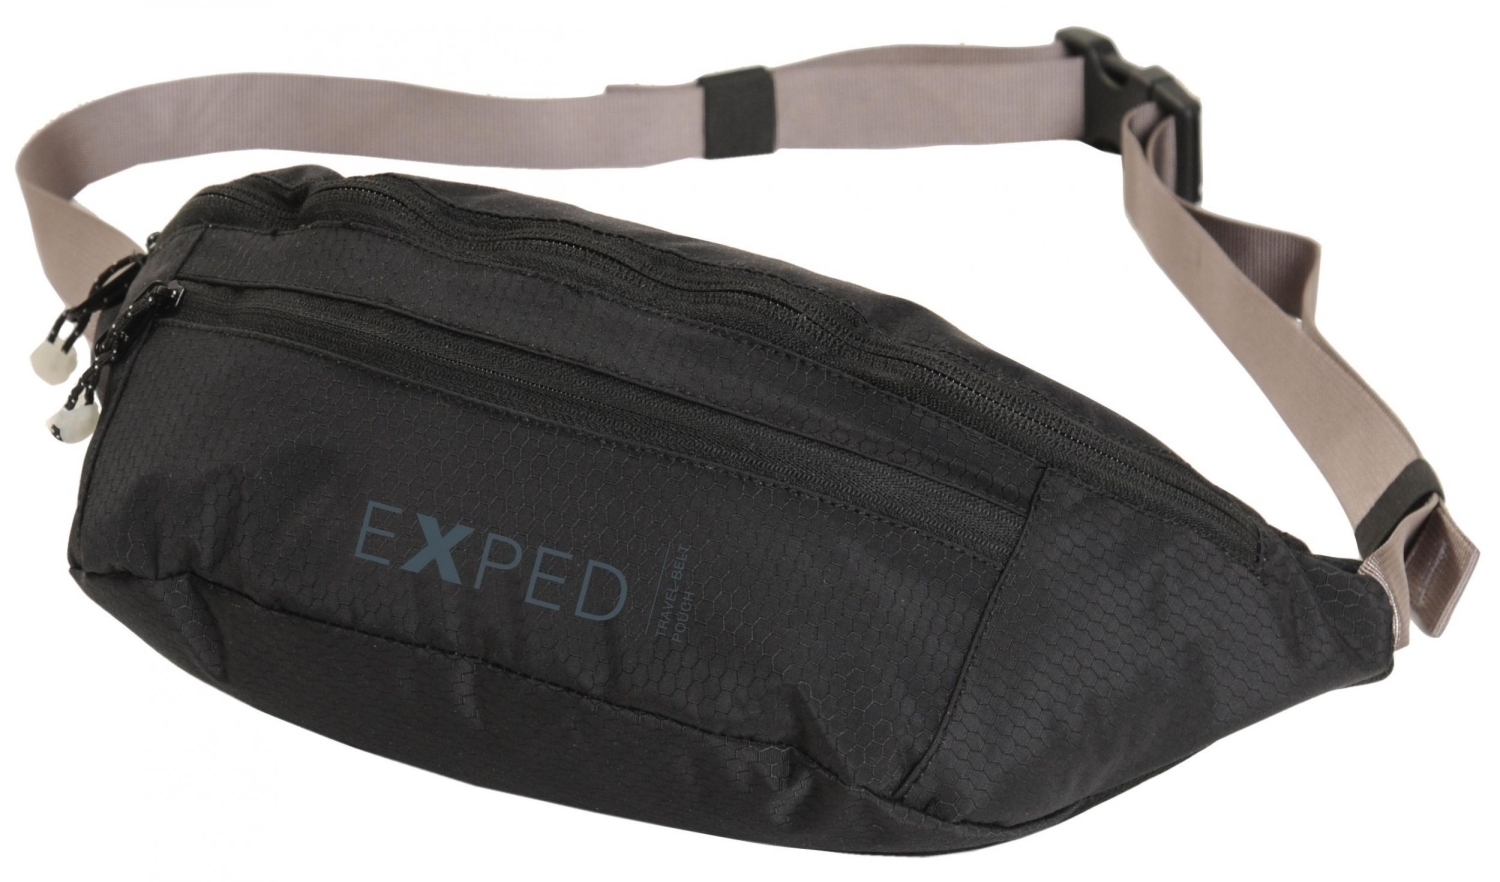 exped travel belt pouch